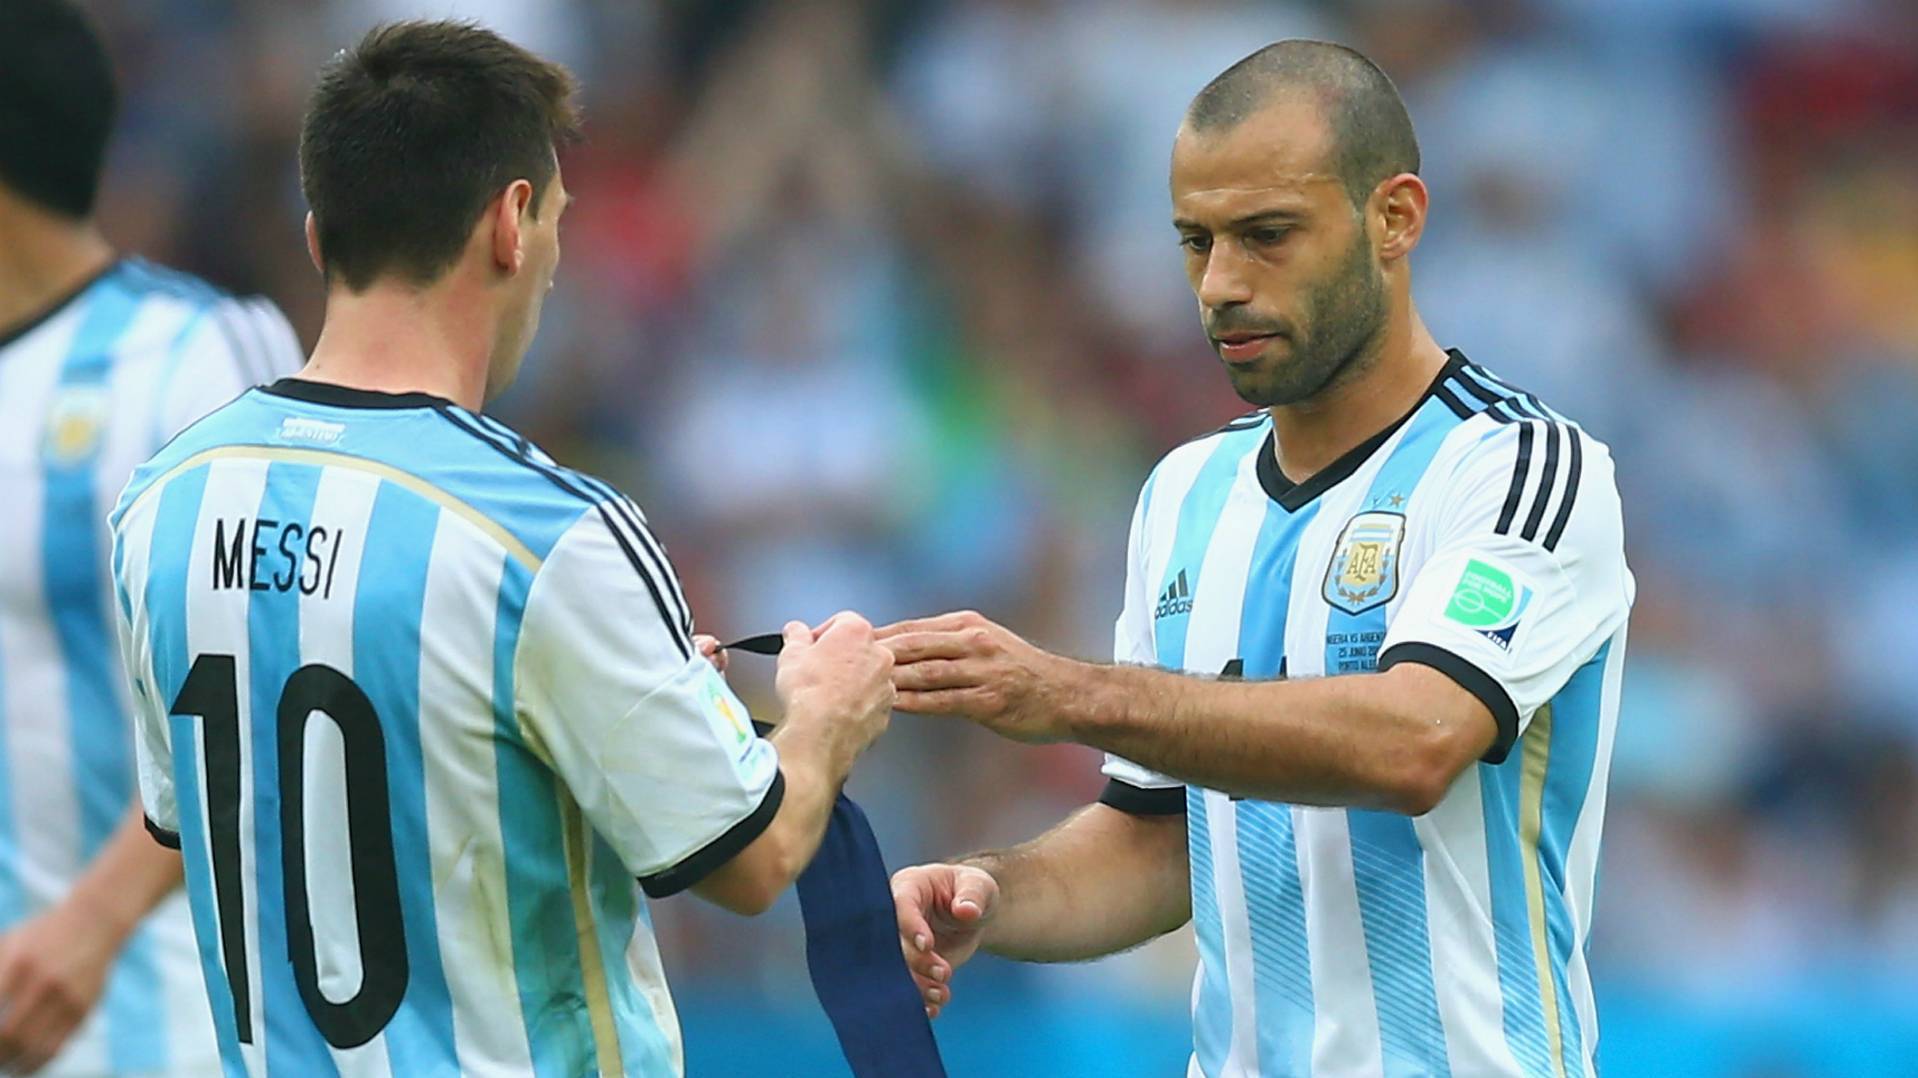 Messi and Mascherano, in a party of the albiceleste